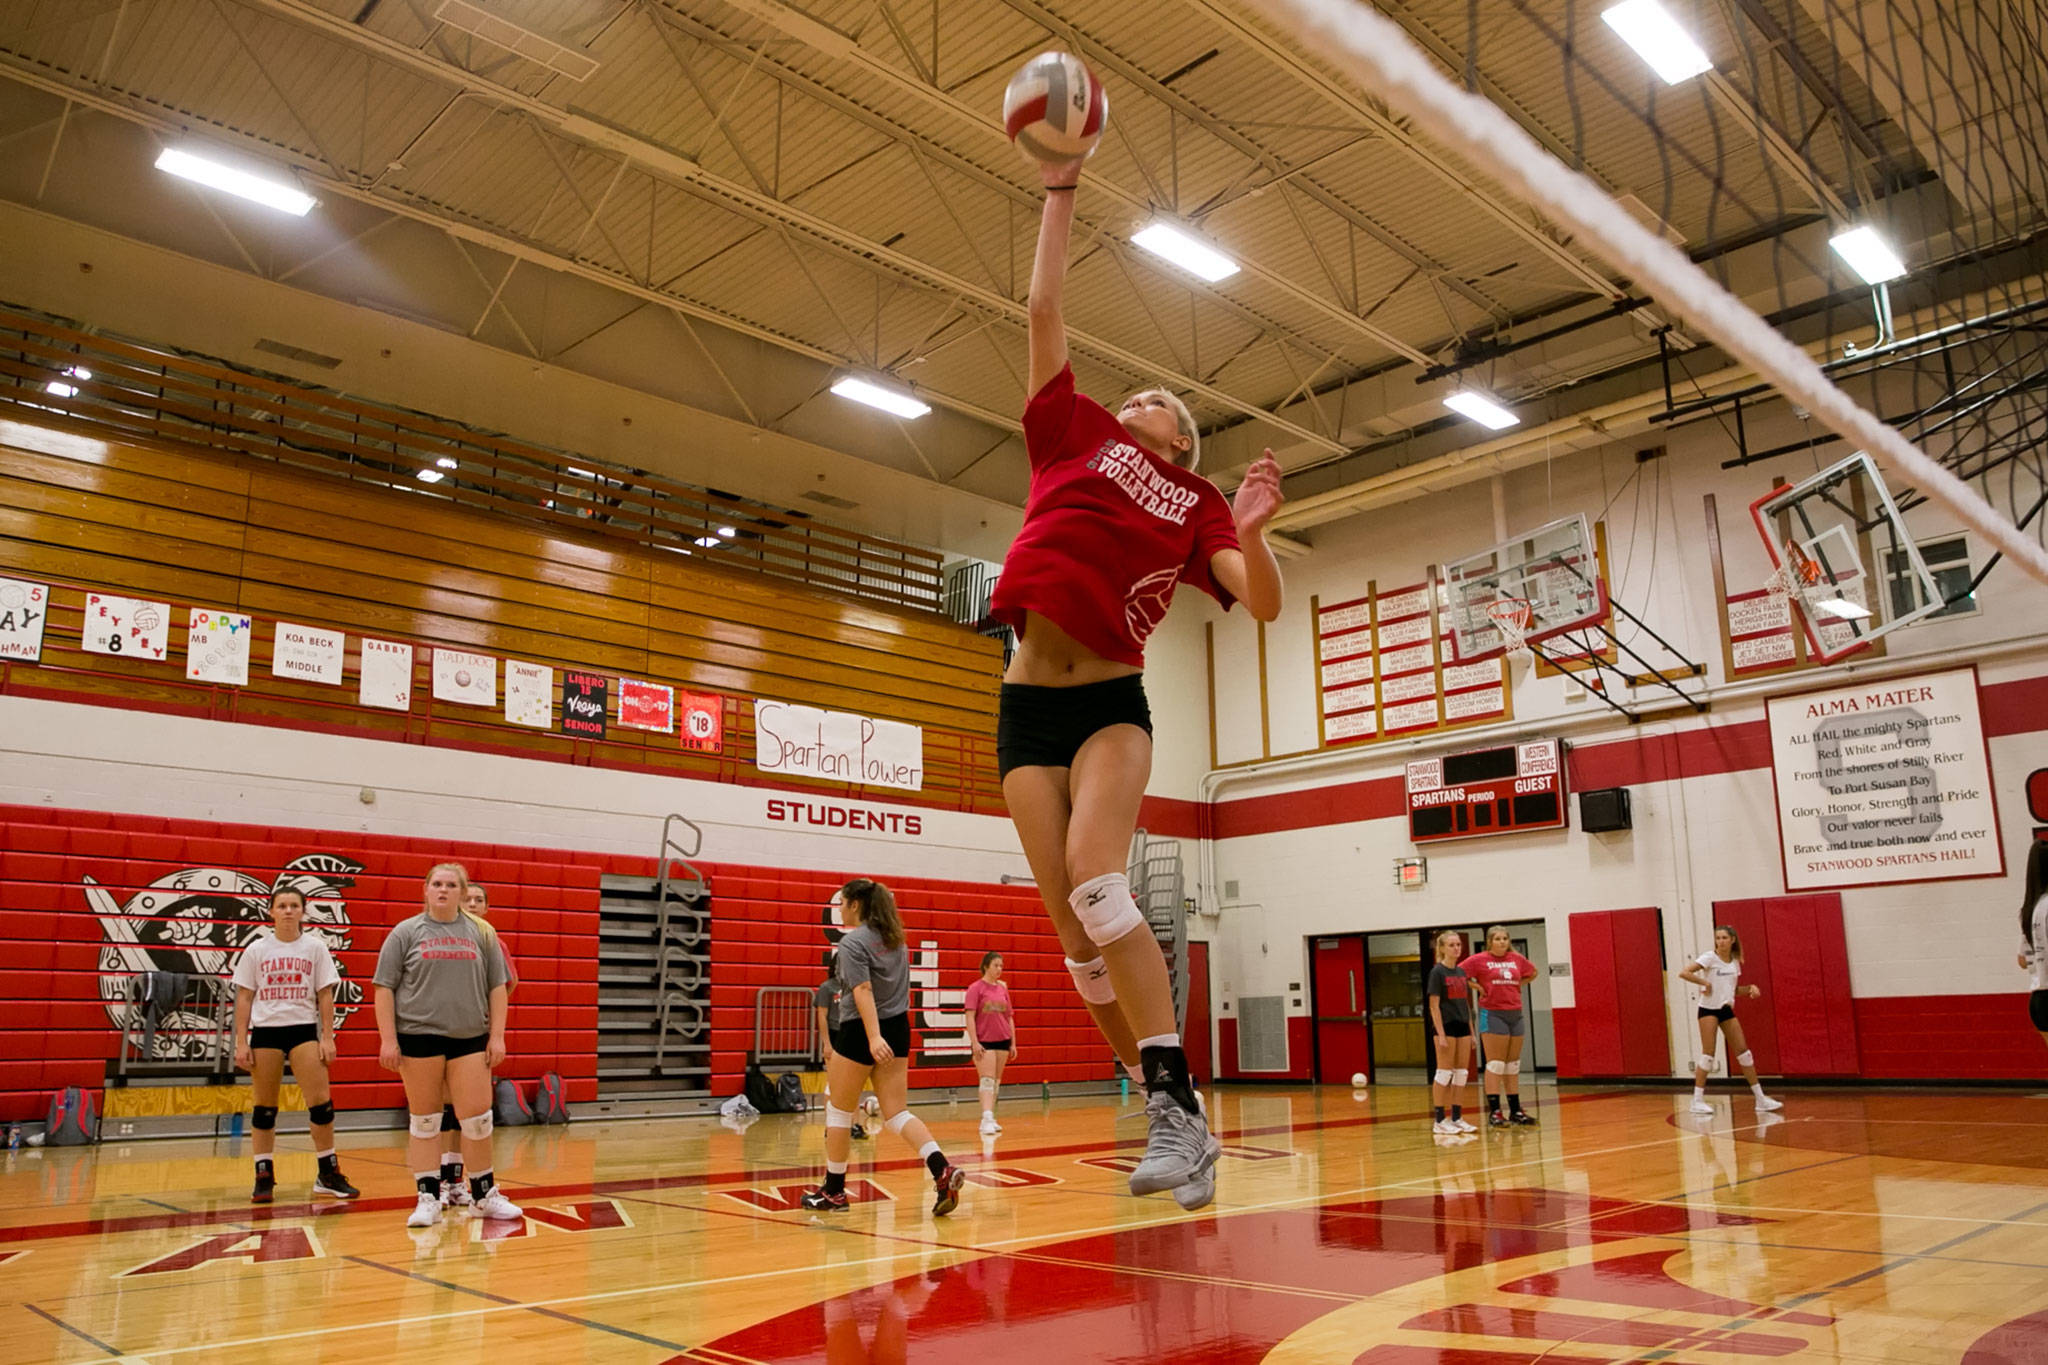 Stanwood senior Devon Martinka attempts a spike during practice on Sept. 12, 2018, at Stanwood High School. (Kevin Clark / The Herald)